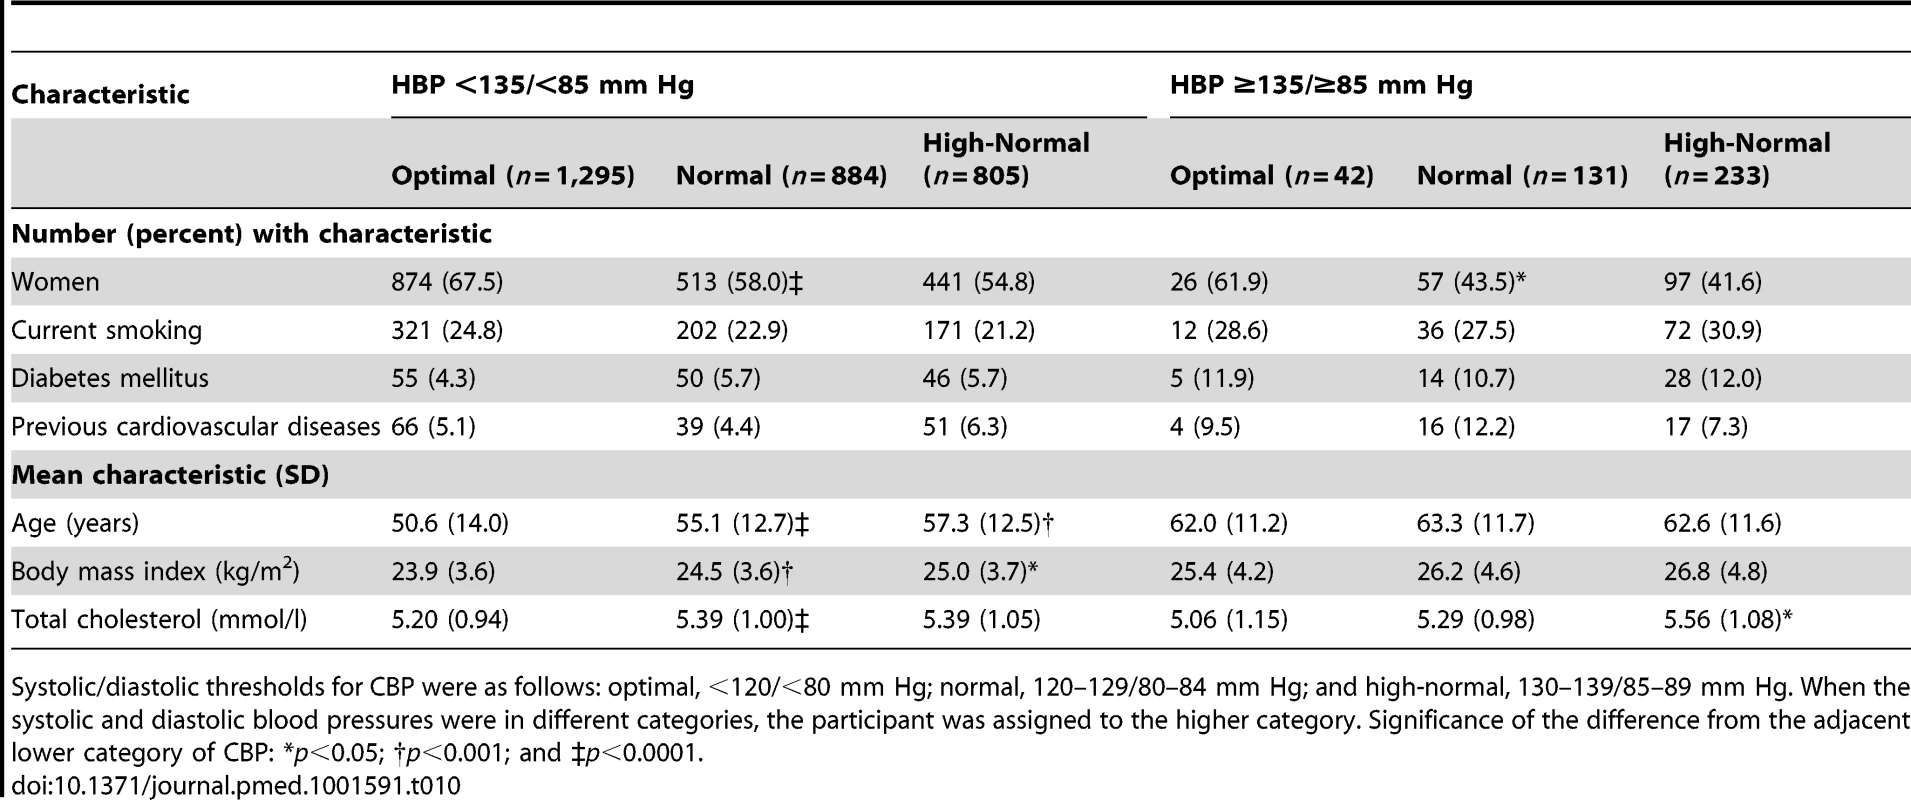 Characteristics of participants with masked hypertension (home blood pressure ≥135/≥85 mm Hg) compared with participants with true optimal, normal, or high-normal blood pressure (home blood pressure &lt;135/&lt;85 mm Hg).